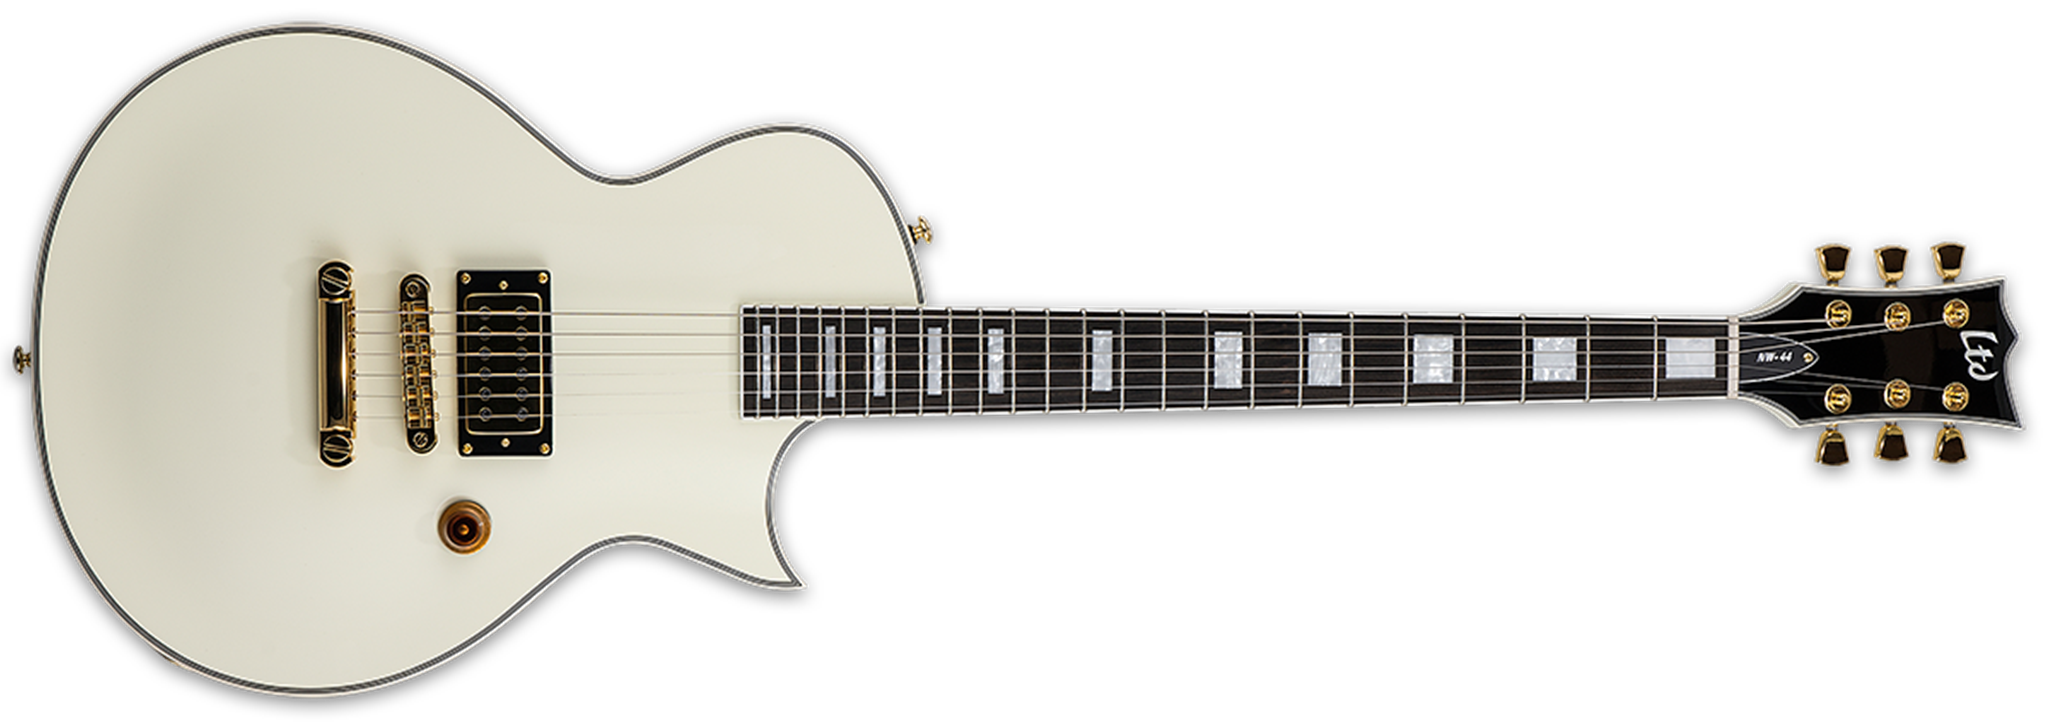 LTD SIGNATURE SERIES  NW-44 Neil Westfall Olympic White  6-String Electric Guitar  